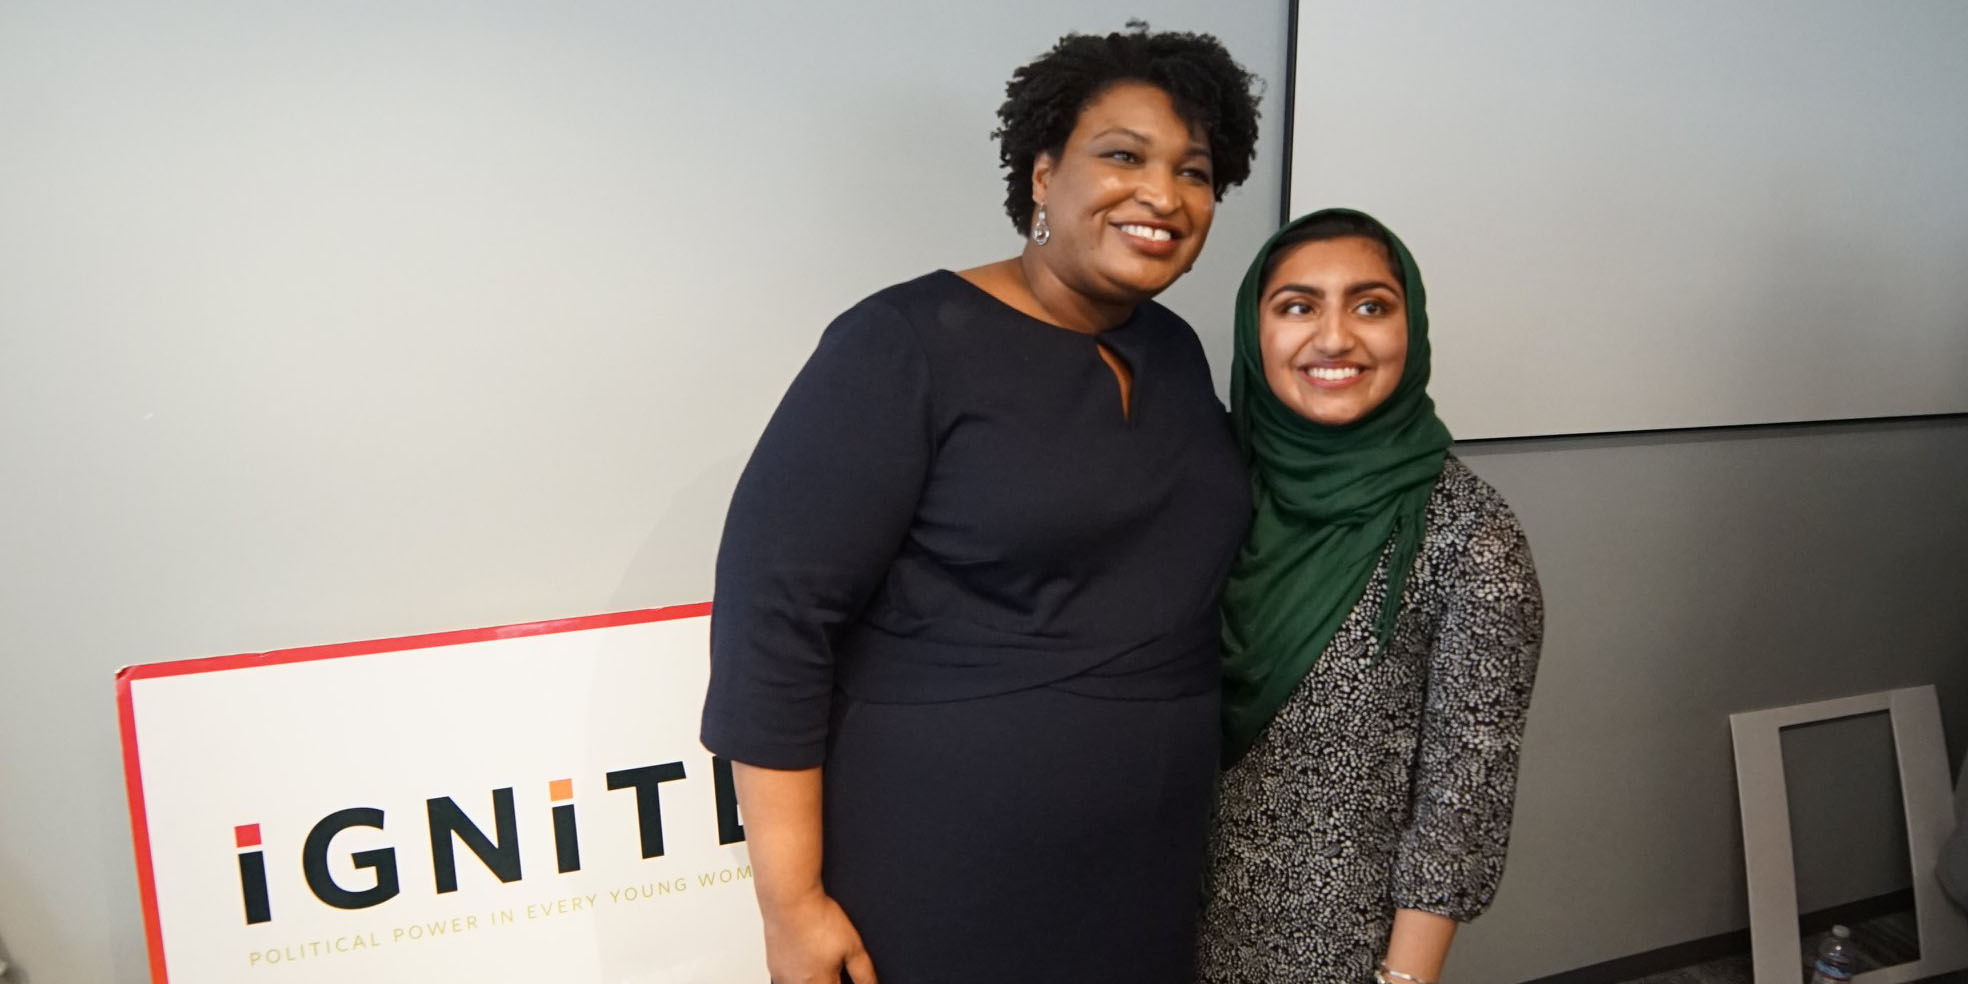 stacey abrams at ignite national young women run political power life timeline.jpg